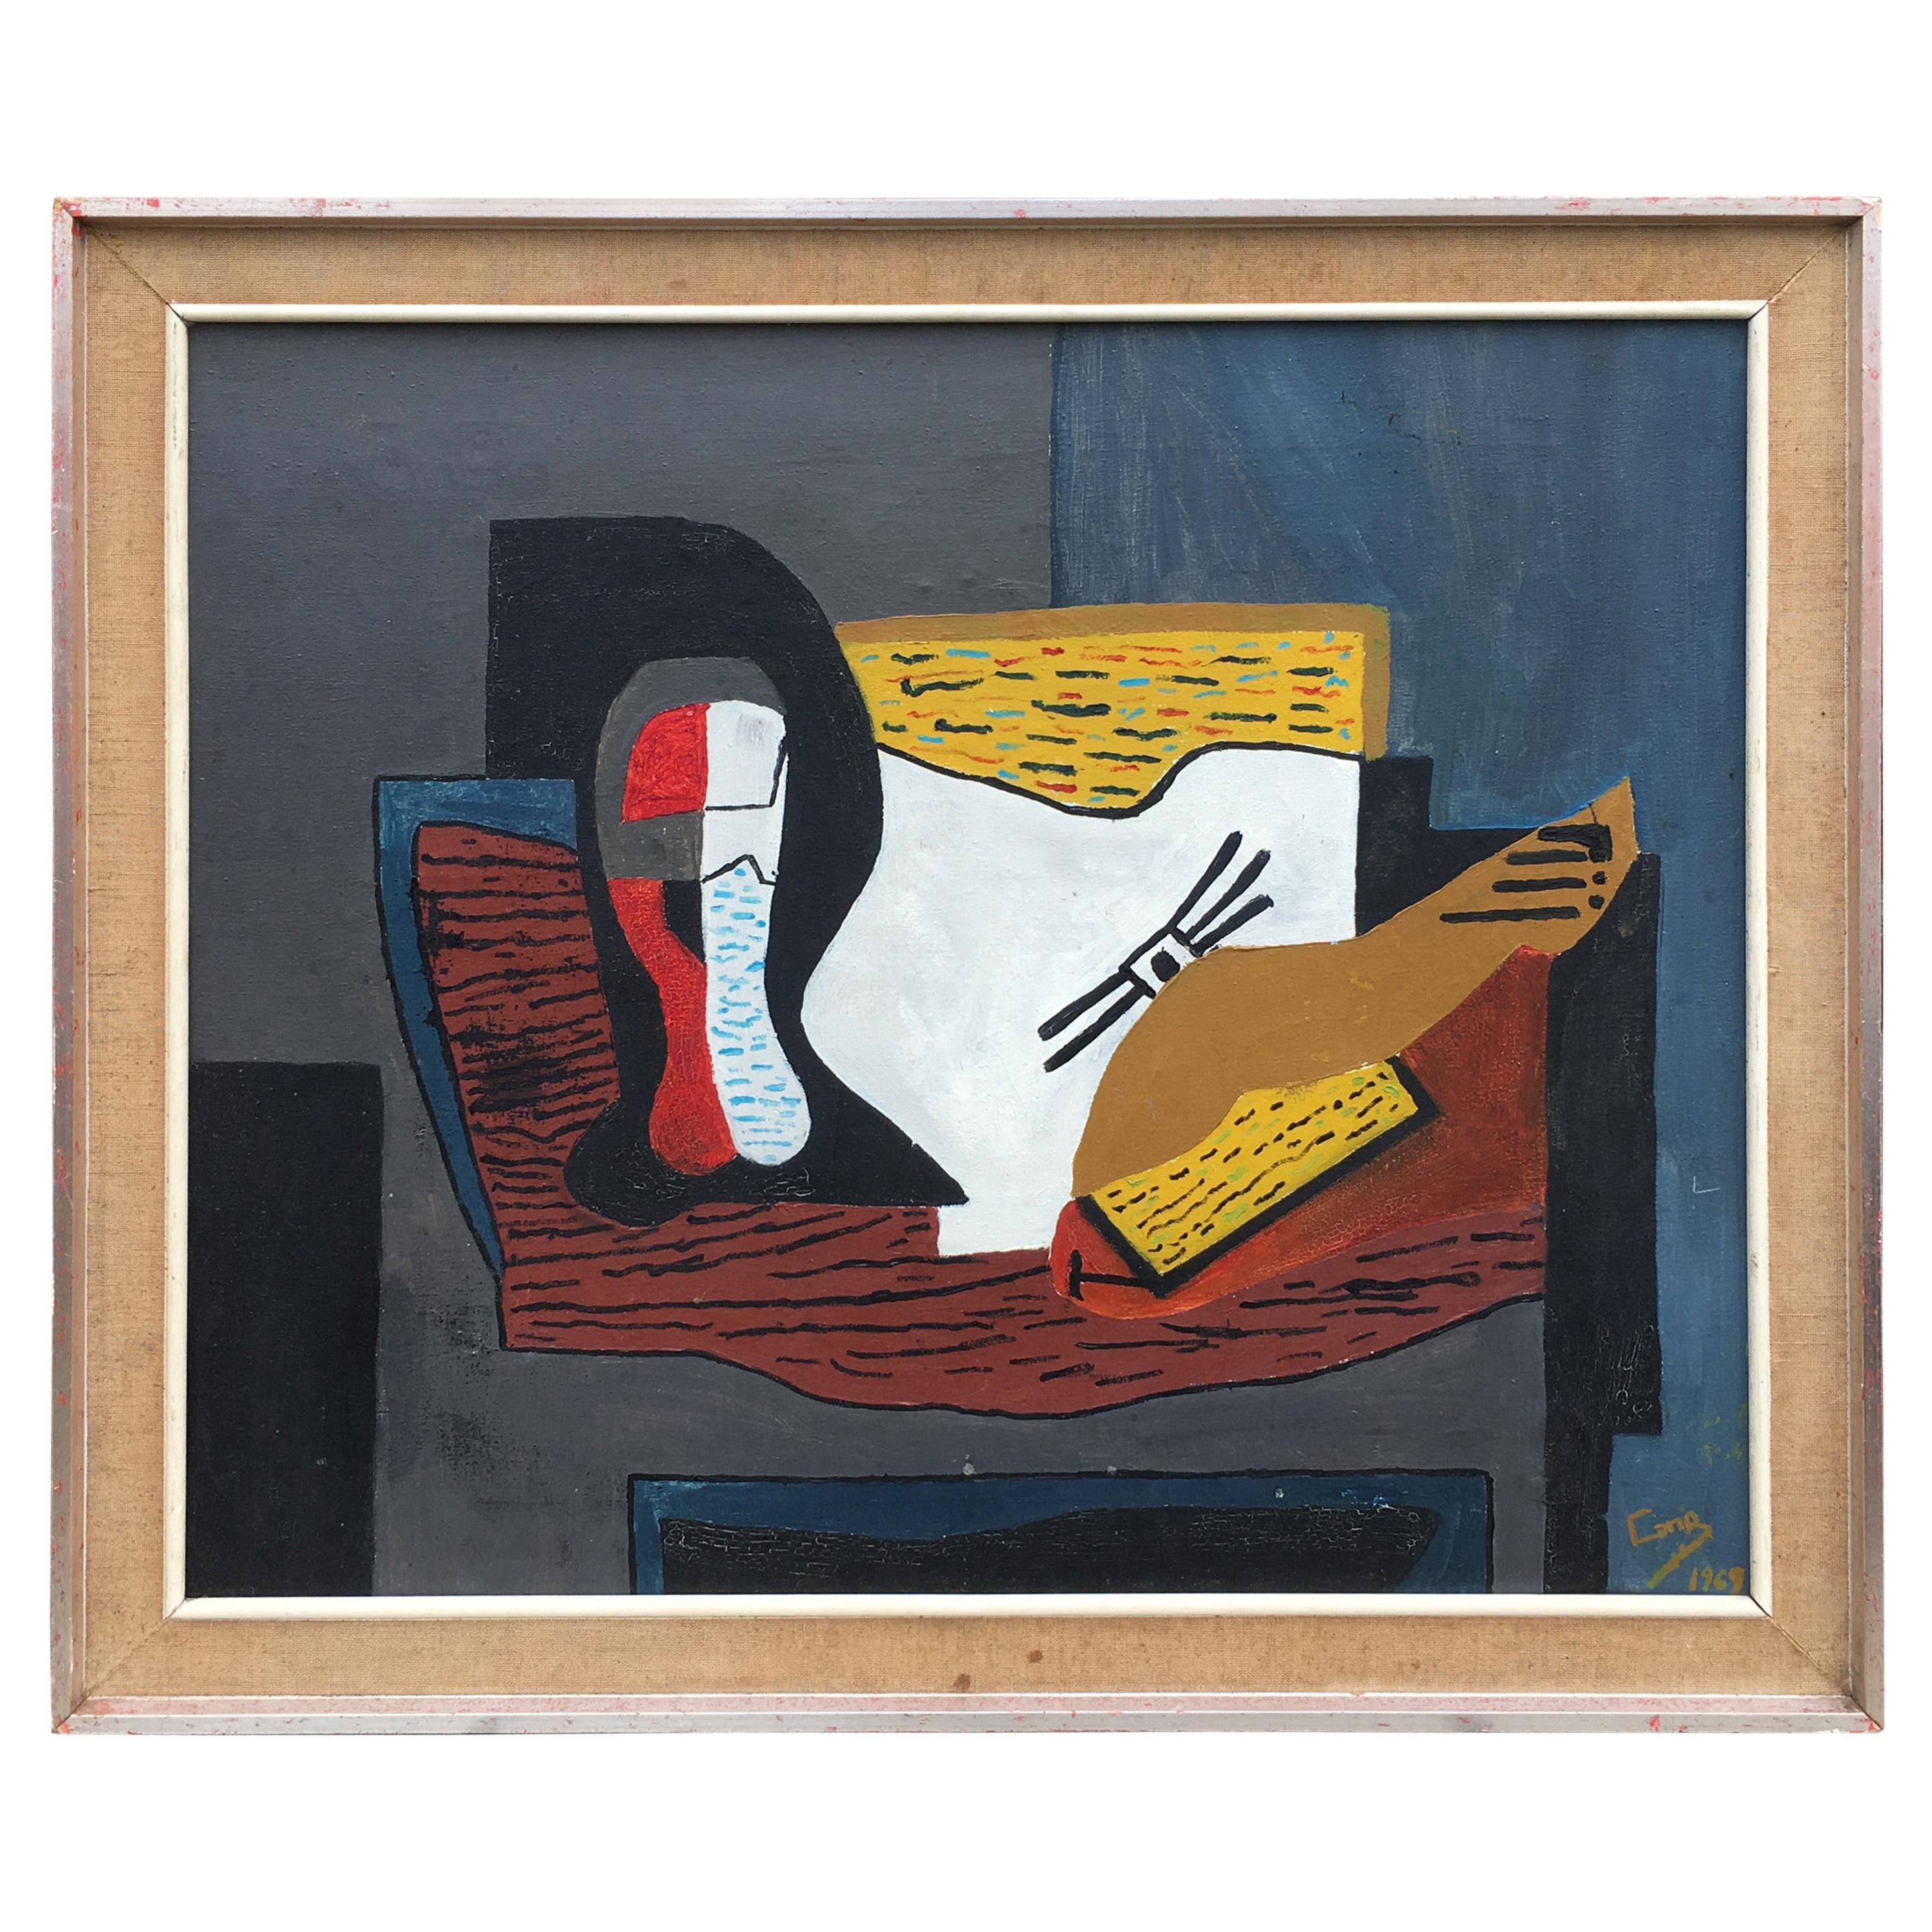 Cano, "composition" Oil on Canvas Signed and Dated 1969